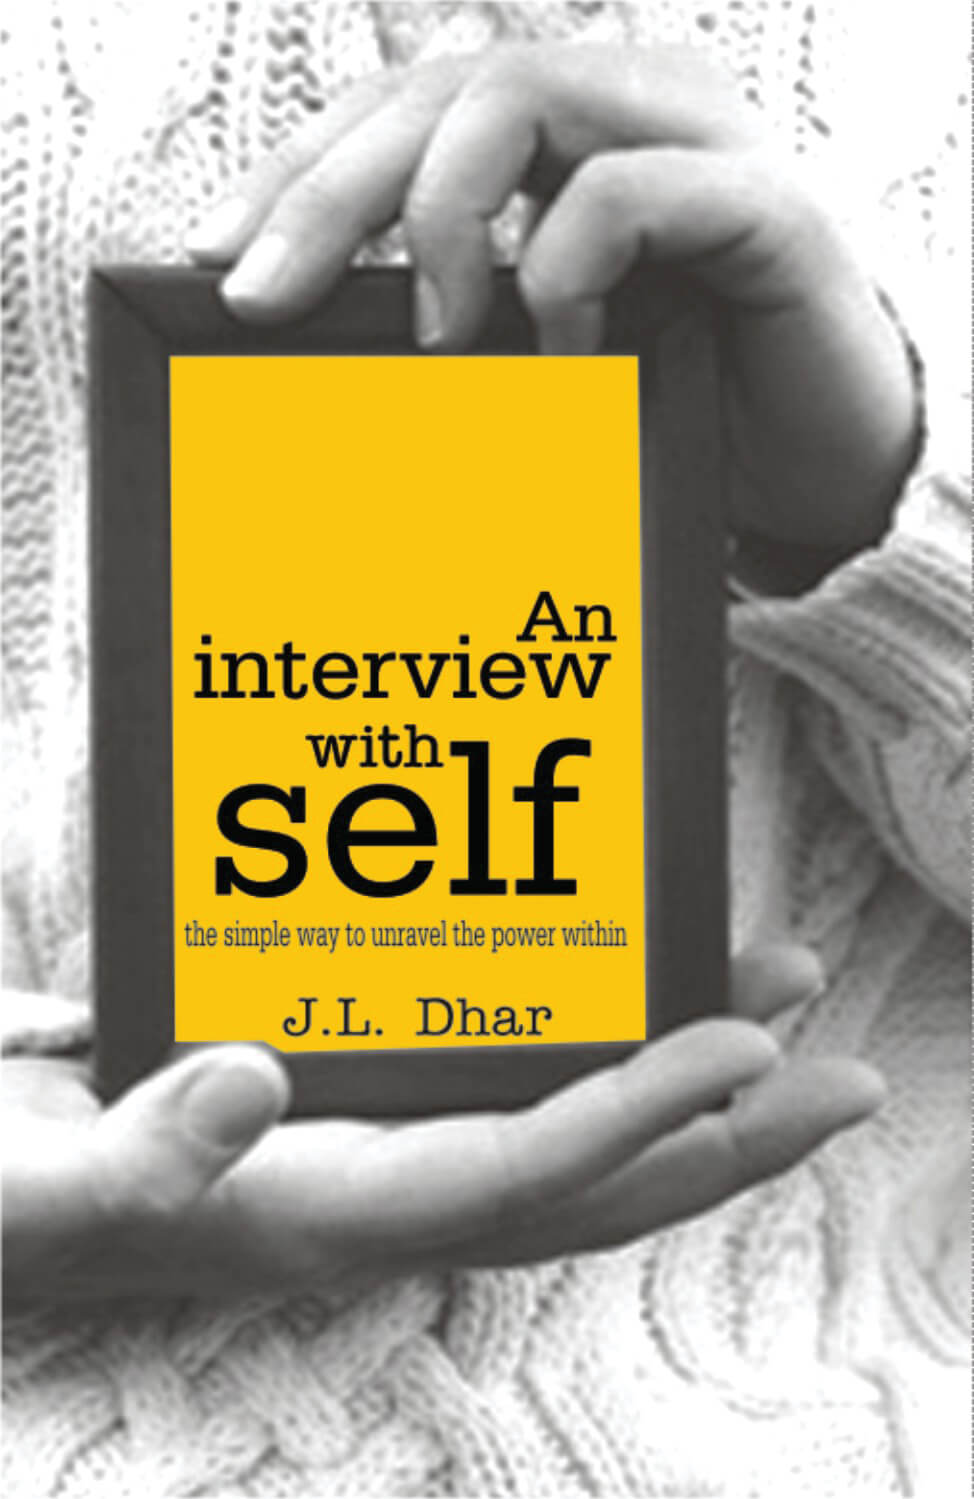 An Interview With Self: The Simple Way To Unravel The Power Within